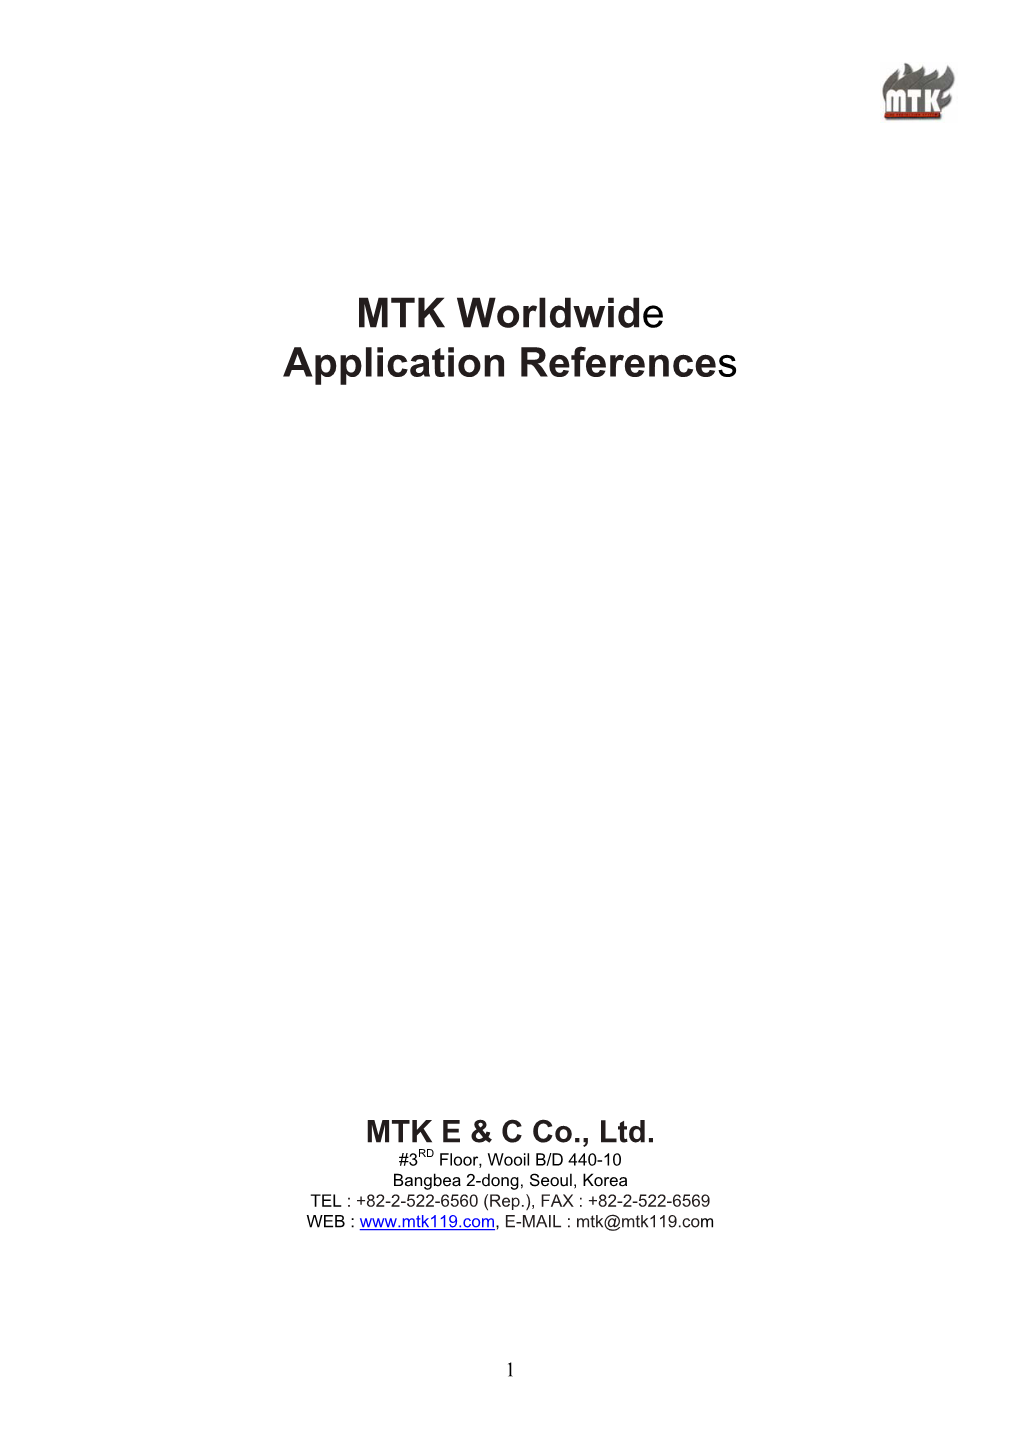 MTK Worldwide Application References